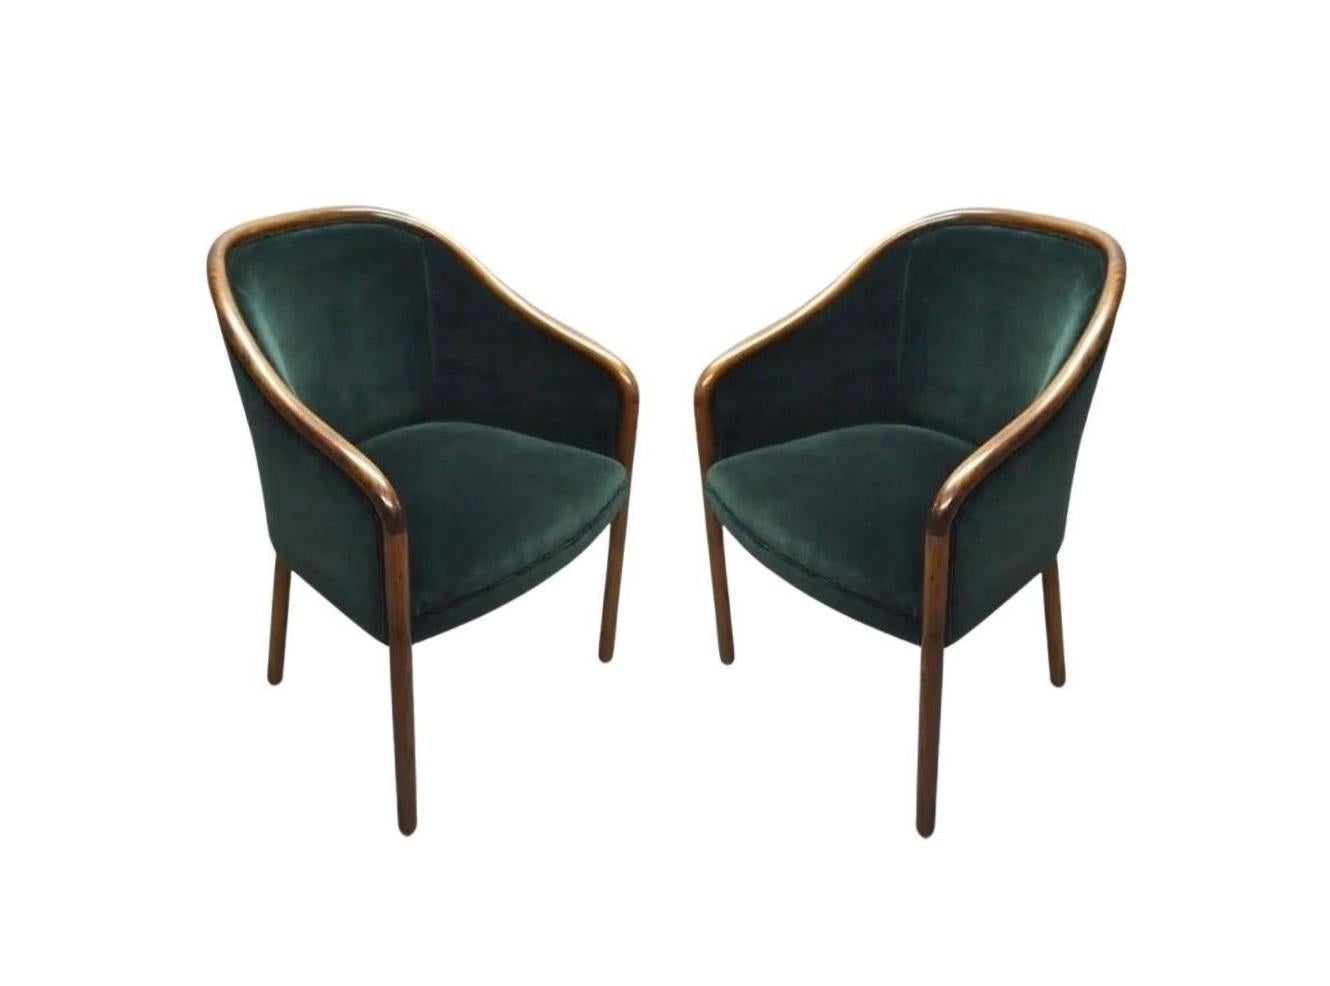 Looking for something that can complement everything in the house? Offered is a rare find, Ward Bennett MR11858 armchairs for Brickel Associates, circa 1970s. Simplicity and elegance were the hallmarks of Bennett's work. A streamlined silhouette, of